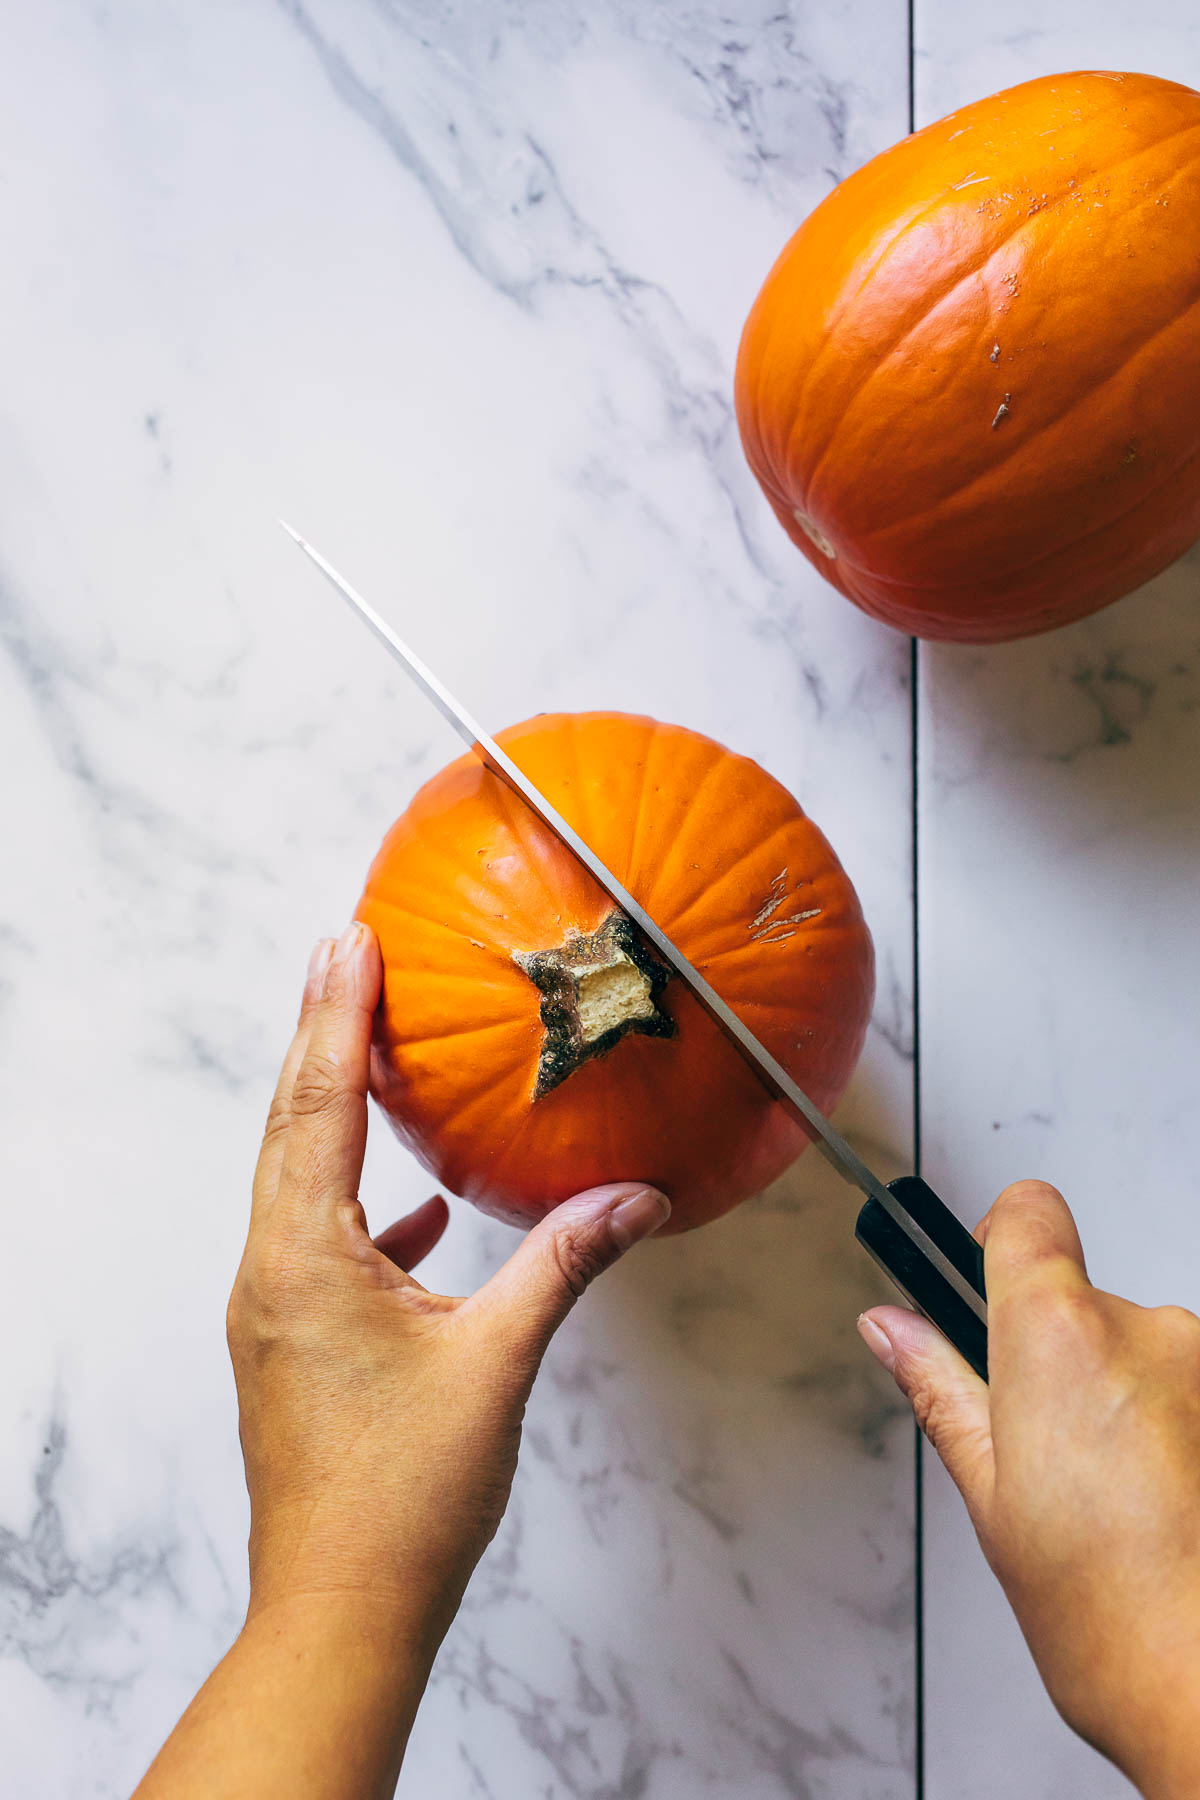 Hands slicing through a small pumpkin with a large chef's knife.